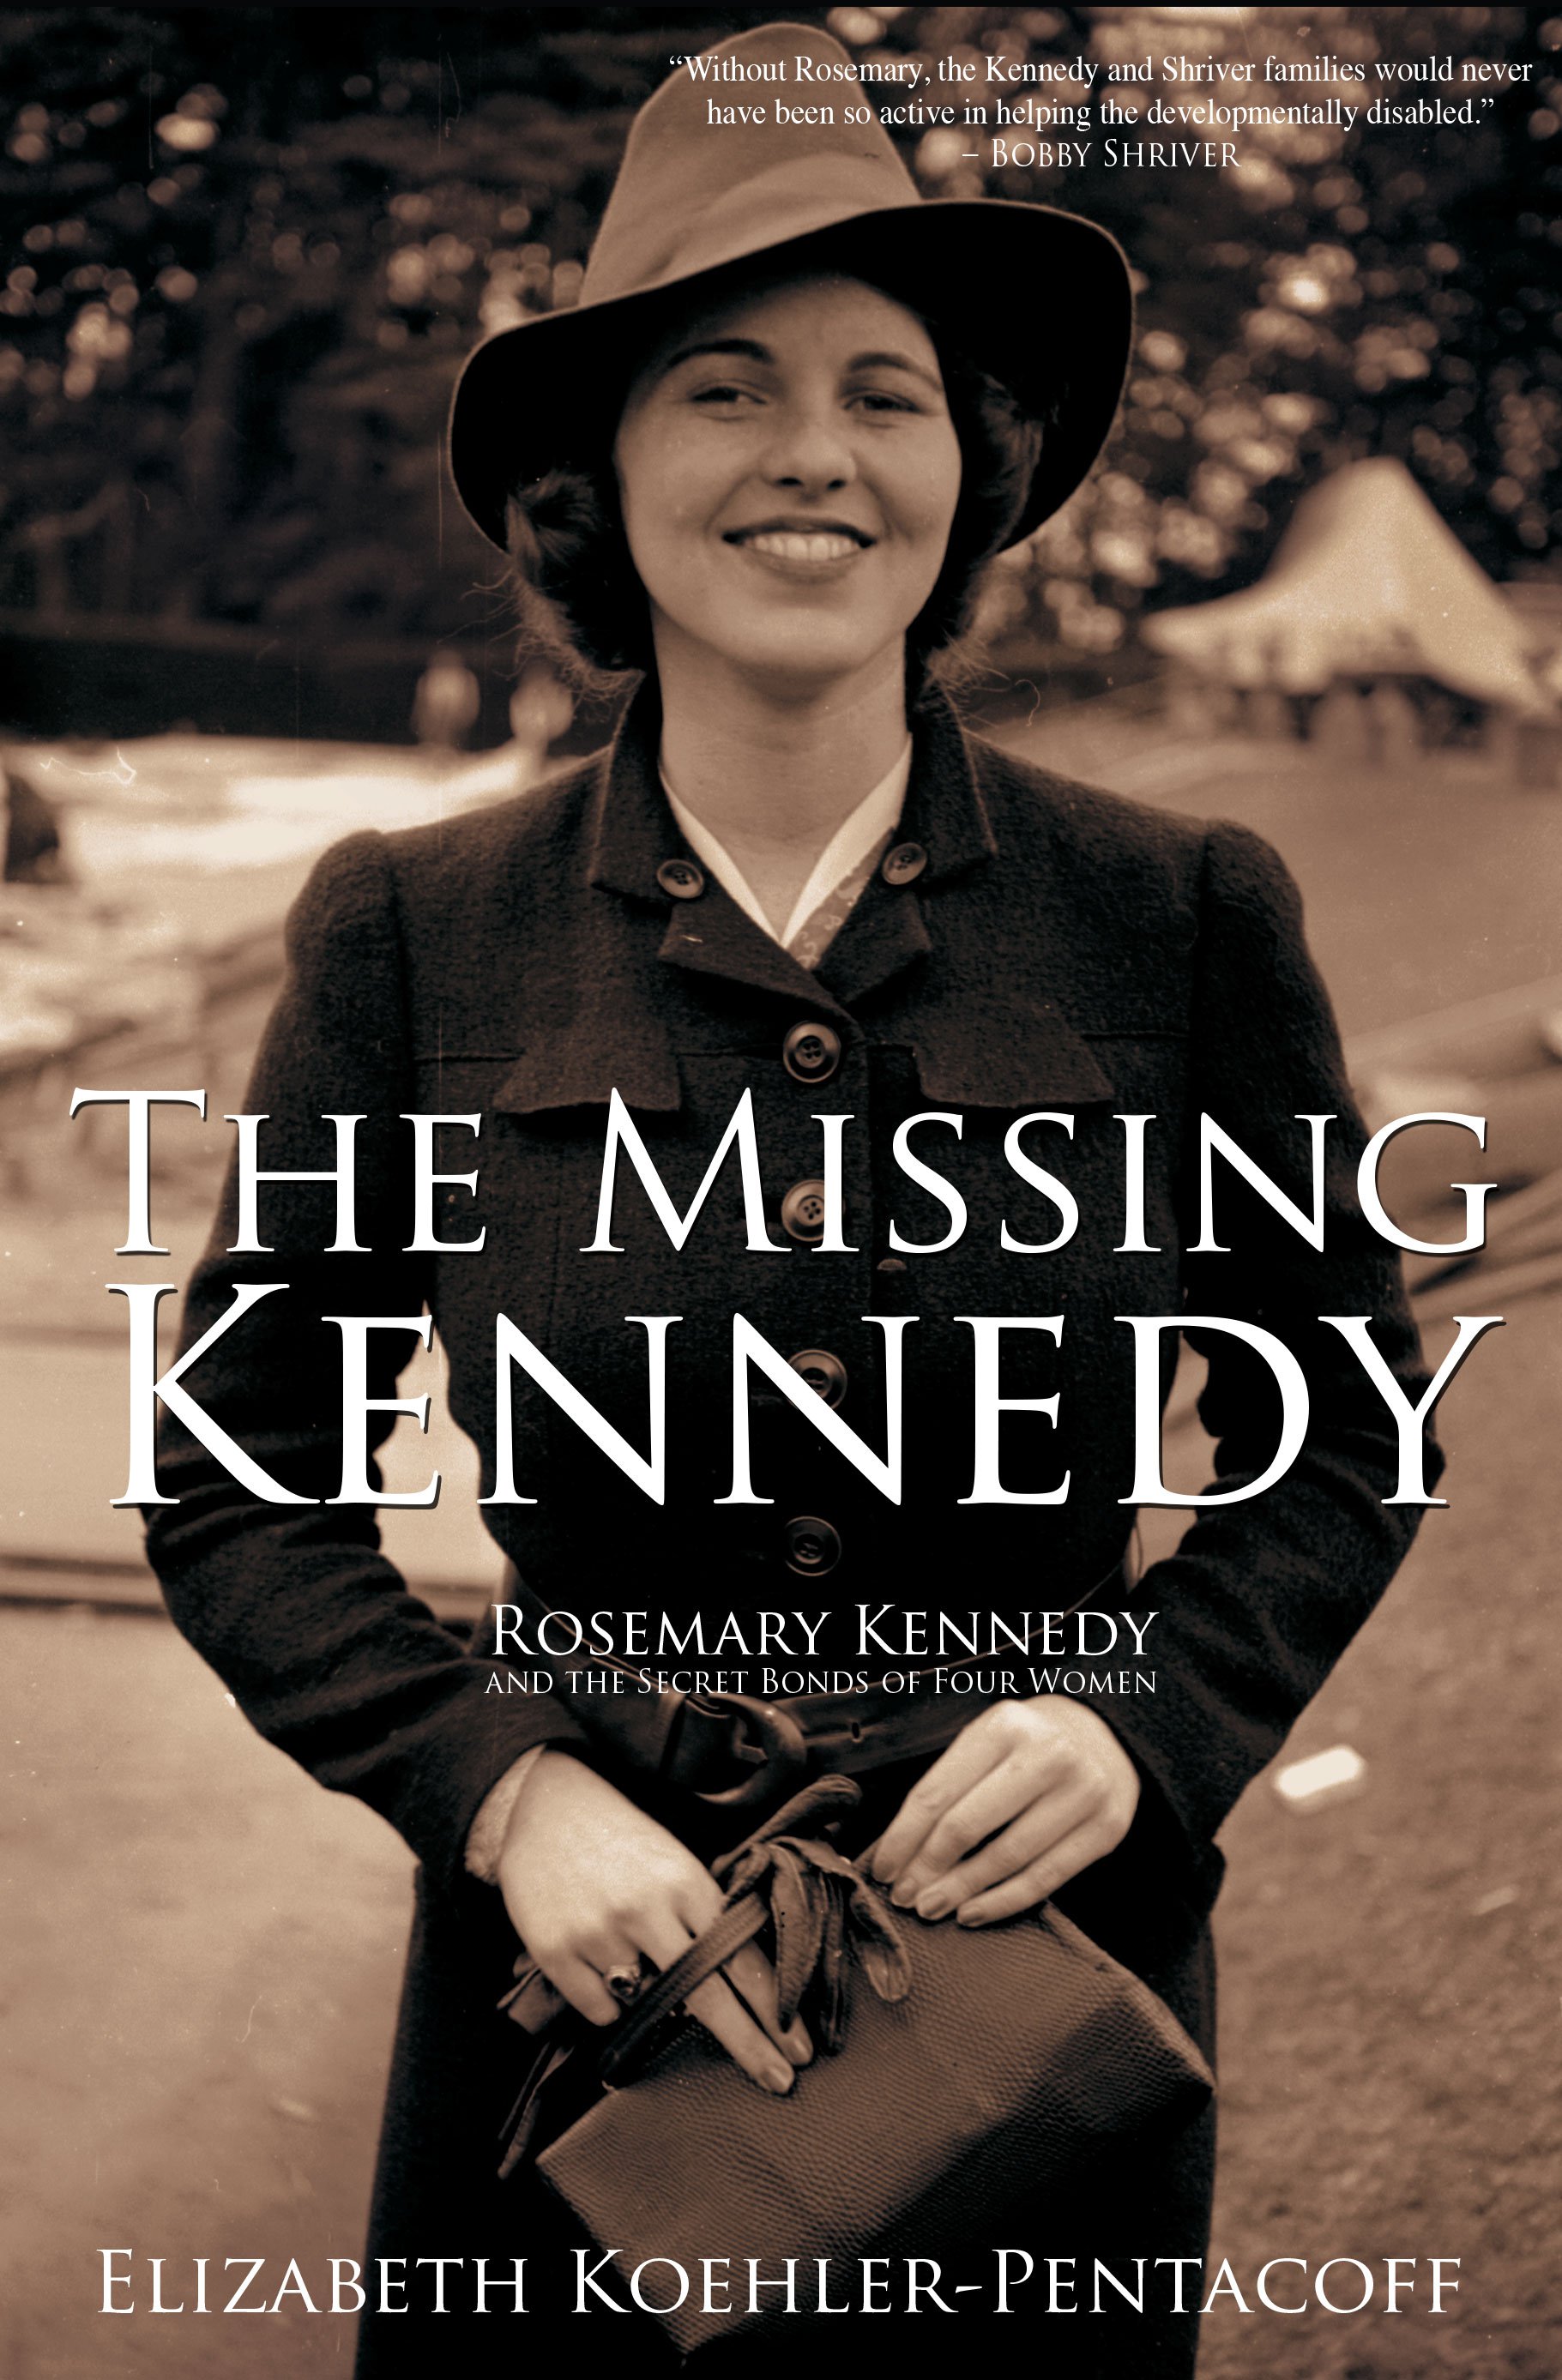 The Missing Kennedy explores the last years of Rosemary Kennedy's life.